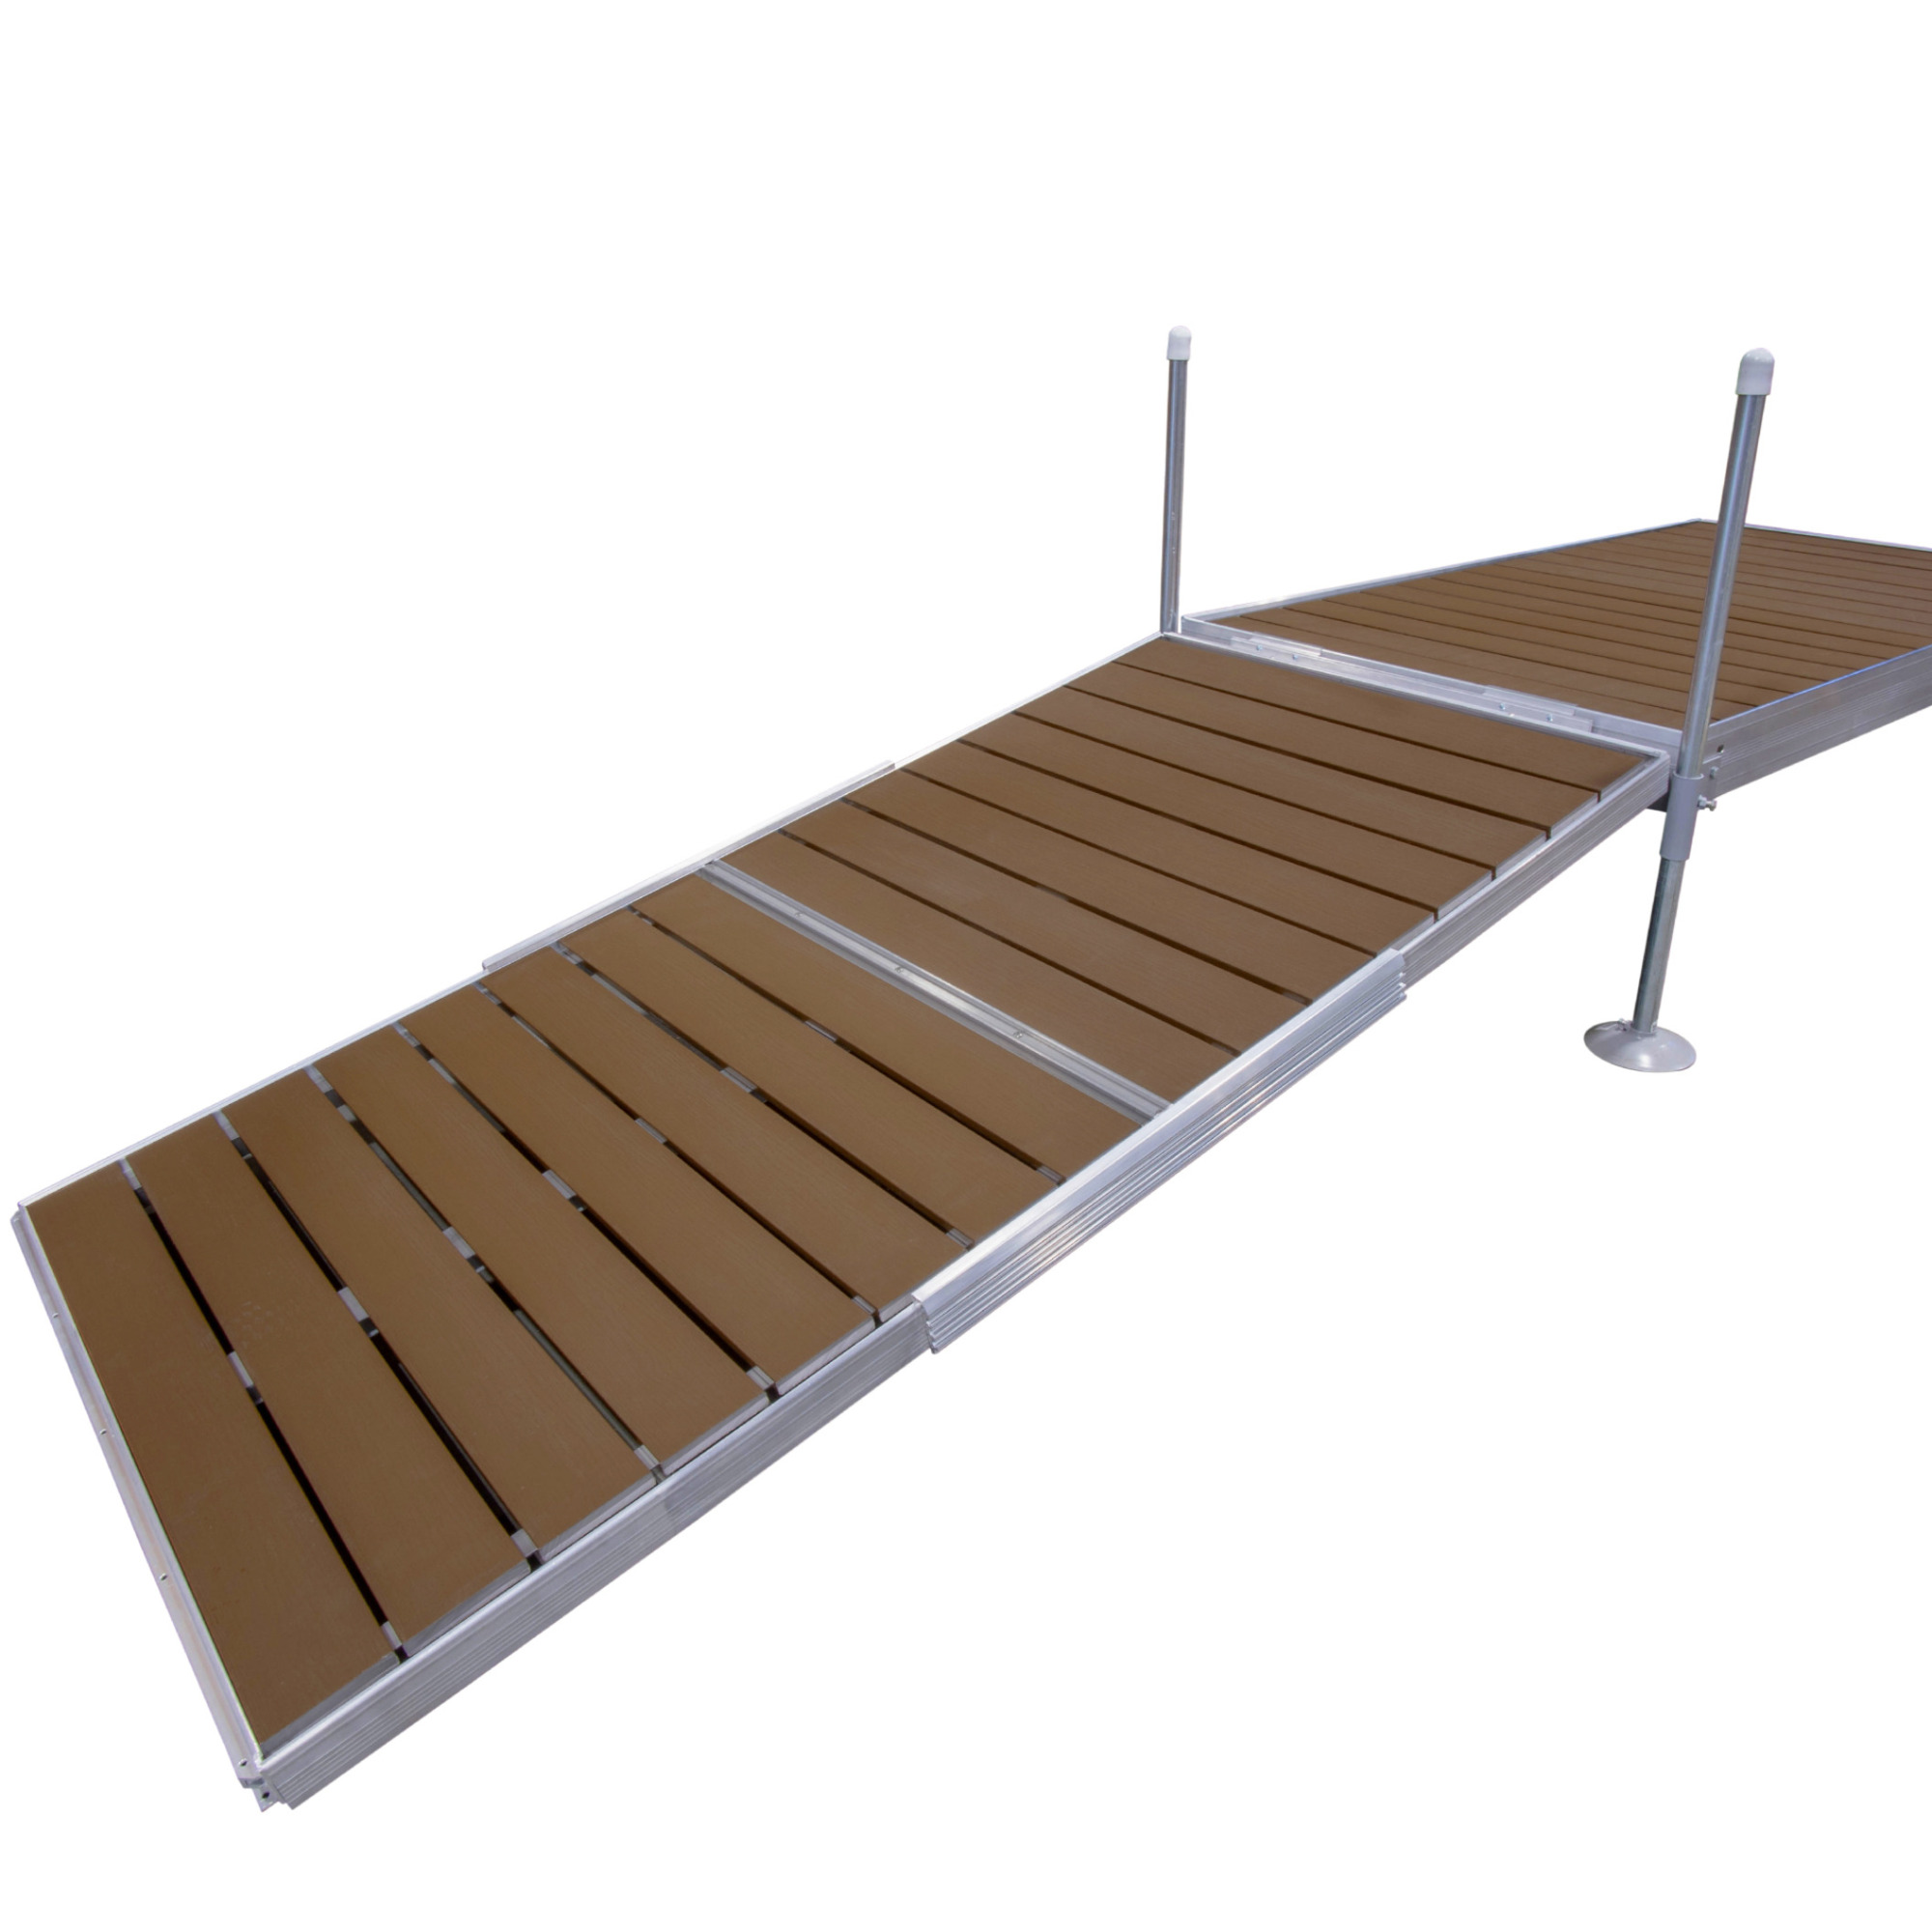 Tommy Docks, 8ft. TD Brown Composite Gangway, Product Type Gangway Kit, Length 65 in, Width 30 in, Model TDGWCB-30541